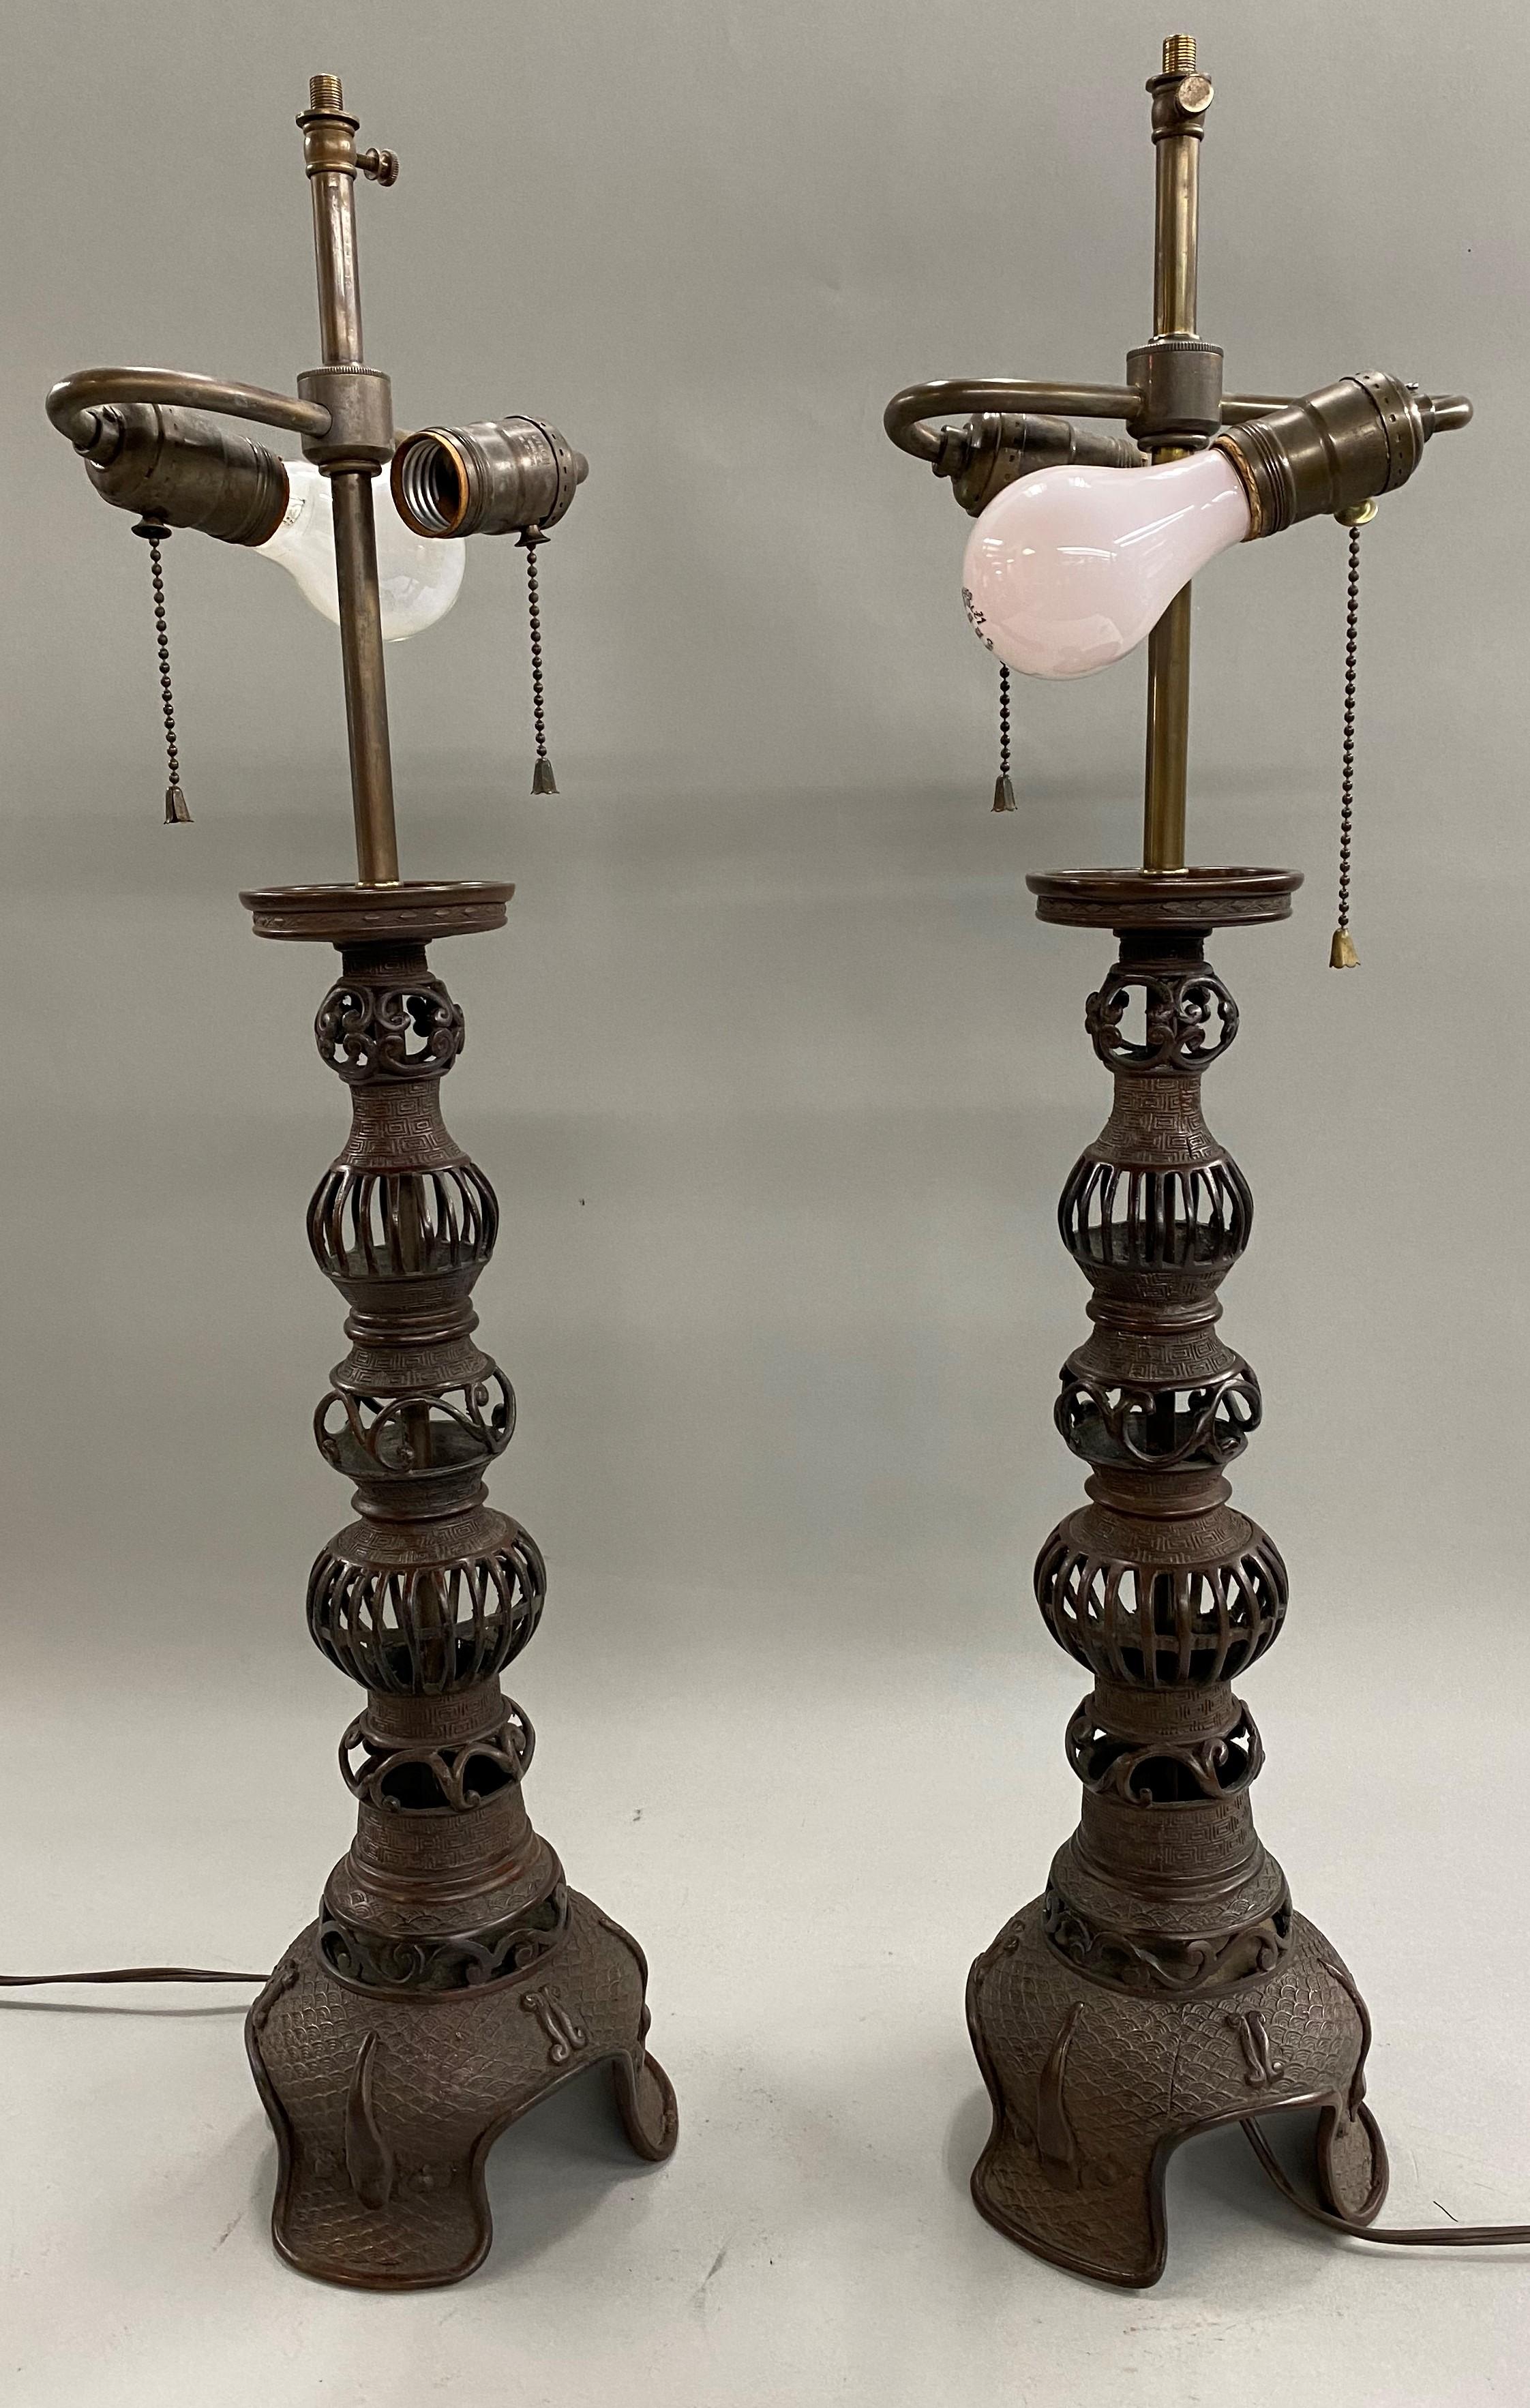 19th Century Pair of Japanese Meiji Reticulated Bronze Table Lamps with Decorative Shades